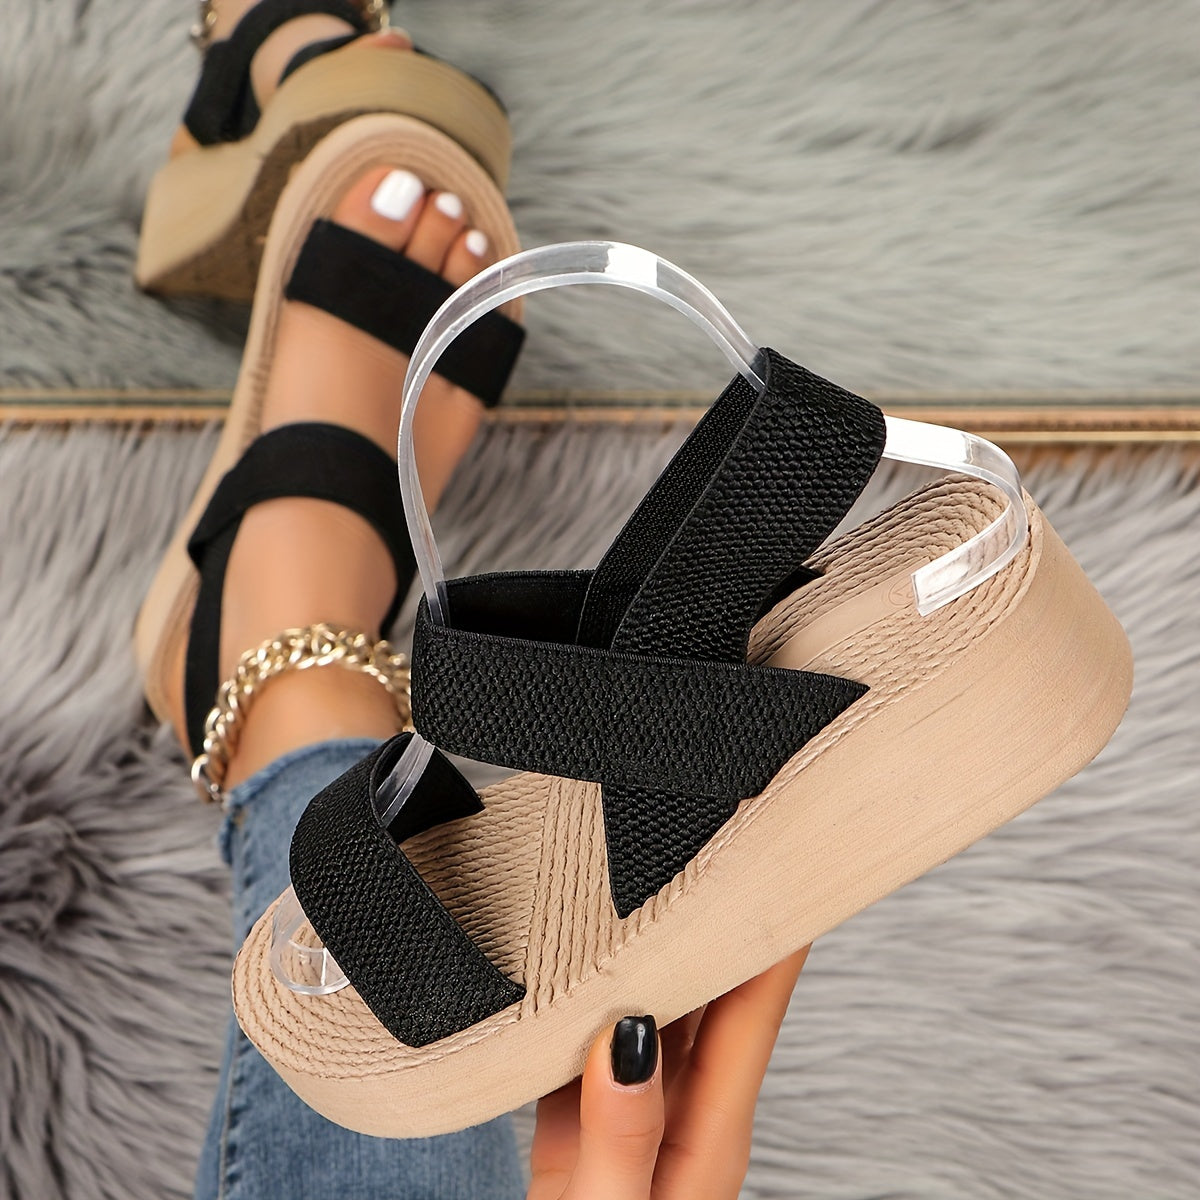 Women's Summer Wedge Sandals, Casual Round Open Toe Elastic Band Shoes, Comfortable Slip On Beach Sandals